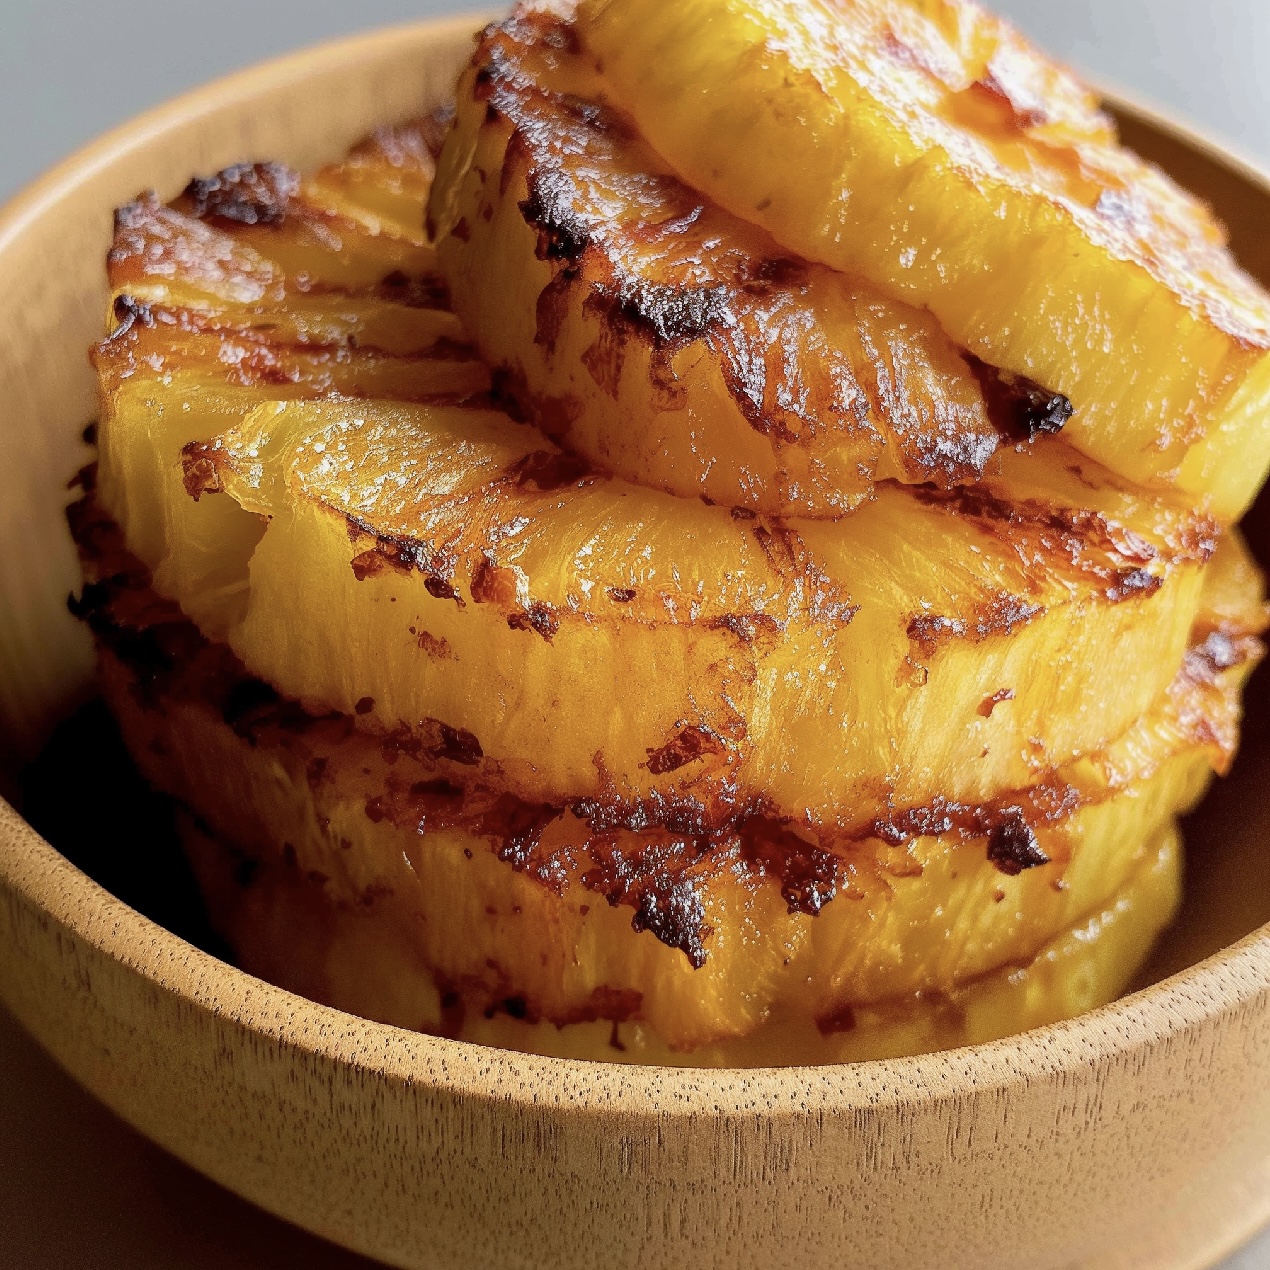 Need a fast dessert that's also healthy? This air-fryer pineapple recipe requires only 3 ingredients and is absolutely delightful!